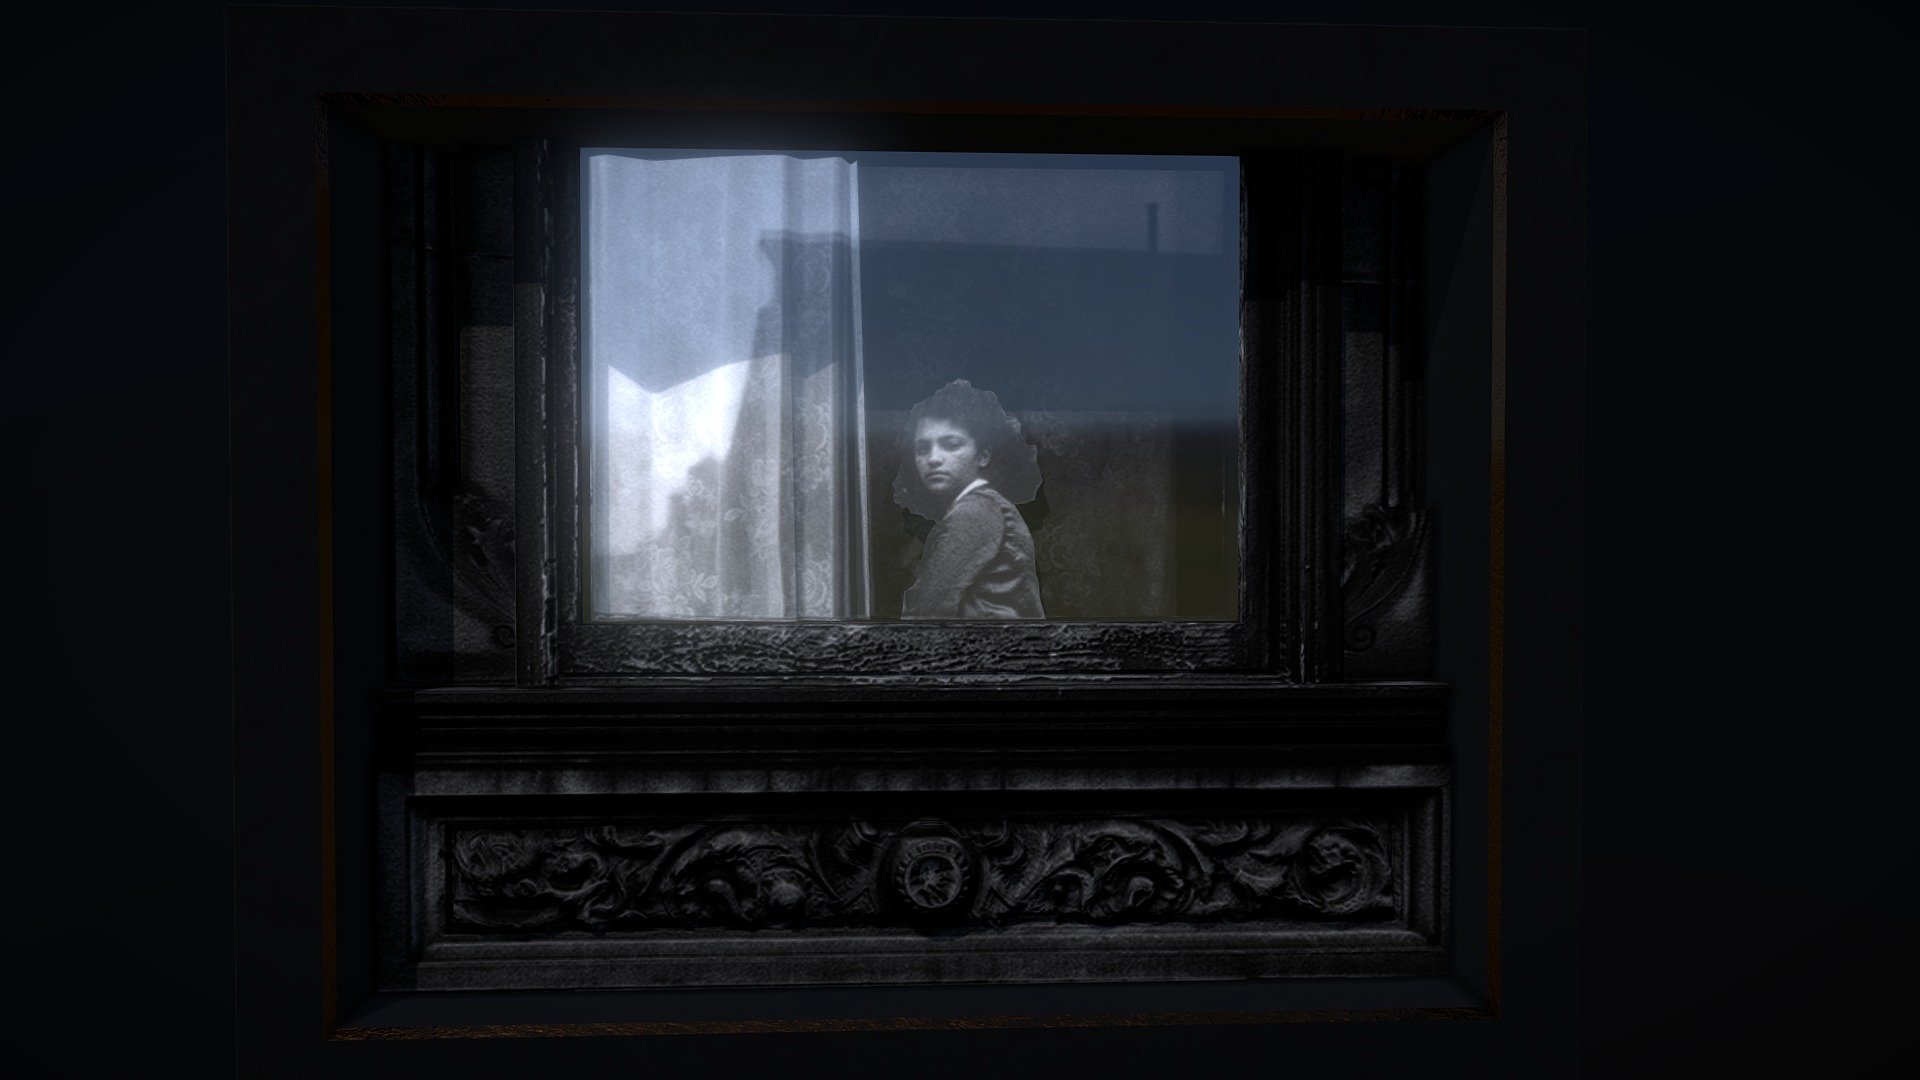 3D Reconstruction of “Girl in the Window”,